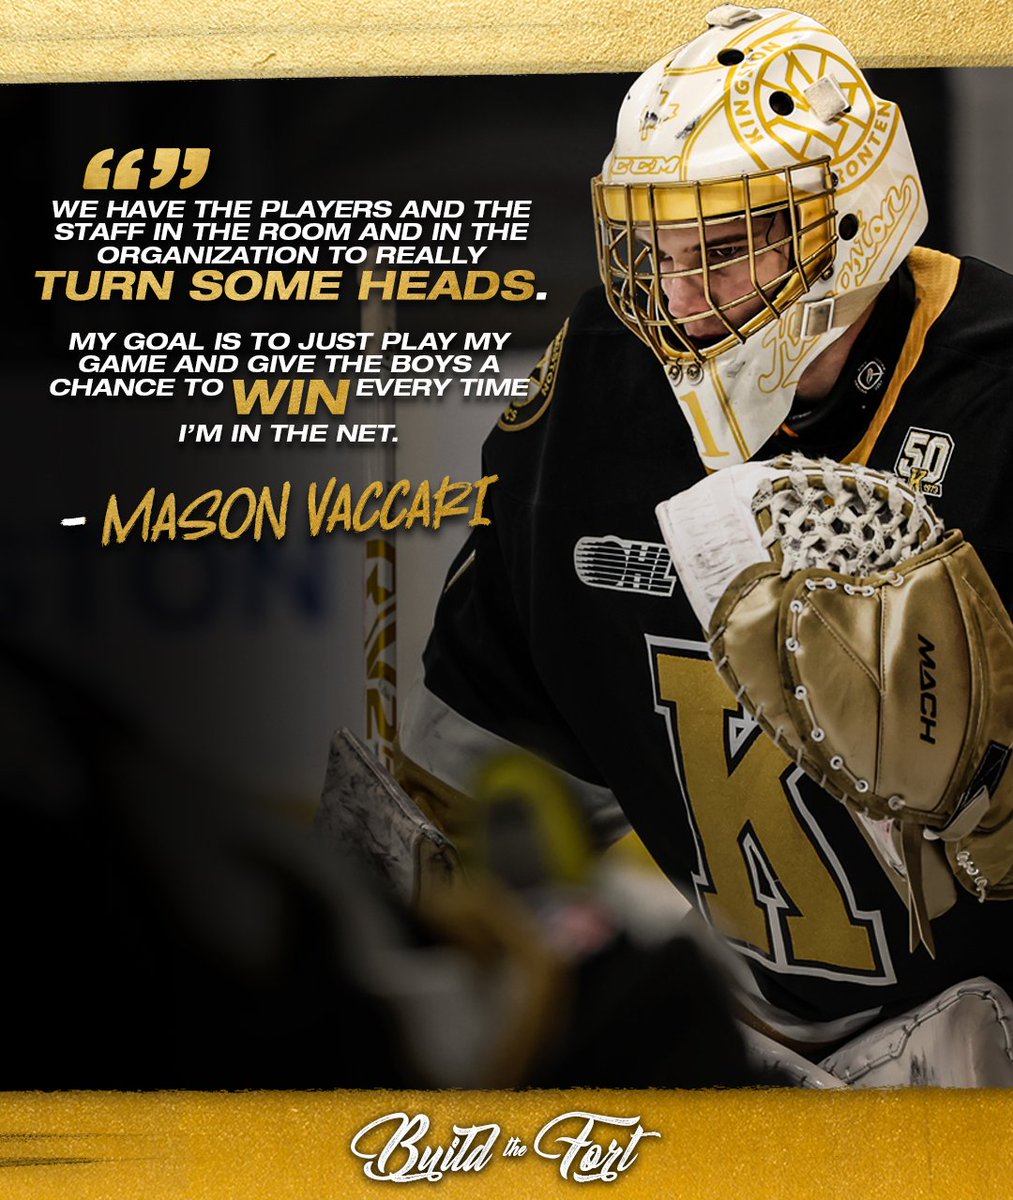 Soon enough, it'll be time to turn some heads.

@MasonVaccari | #FrontsHockey